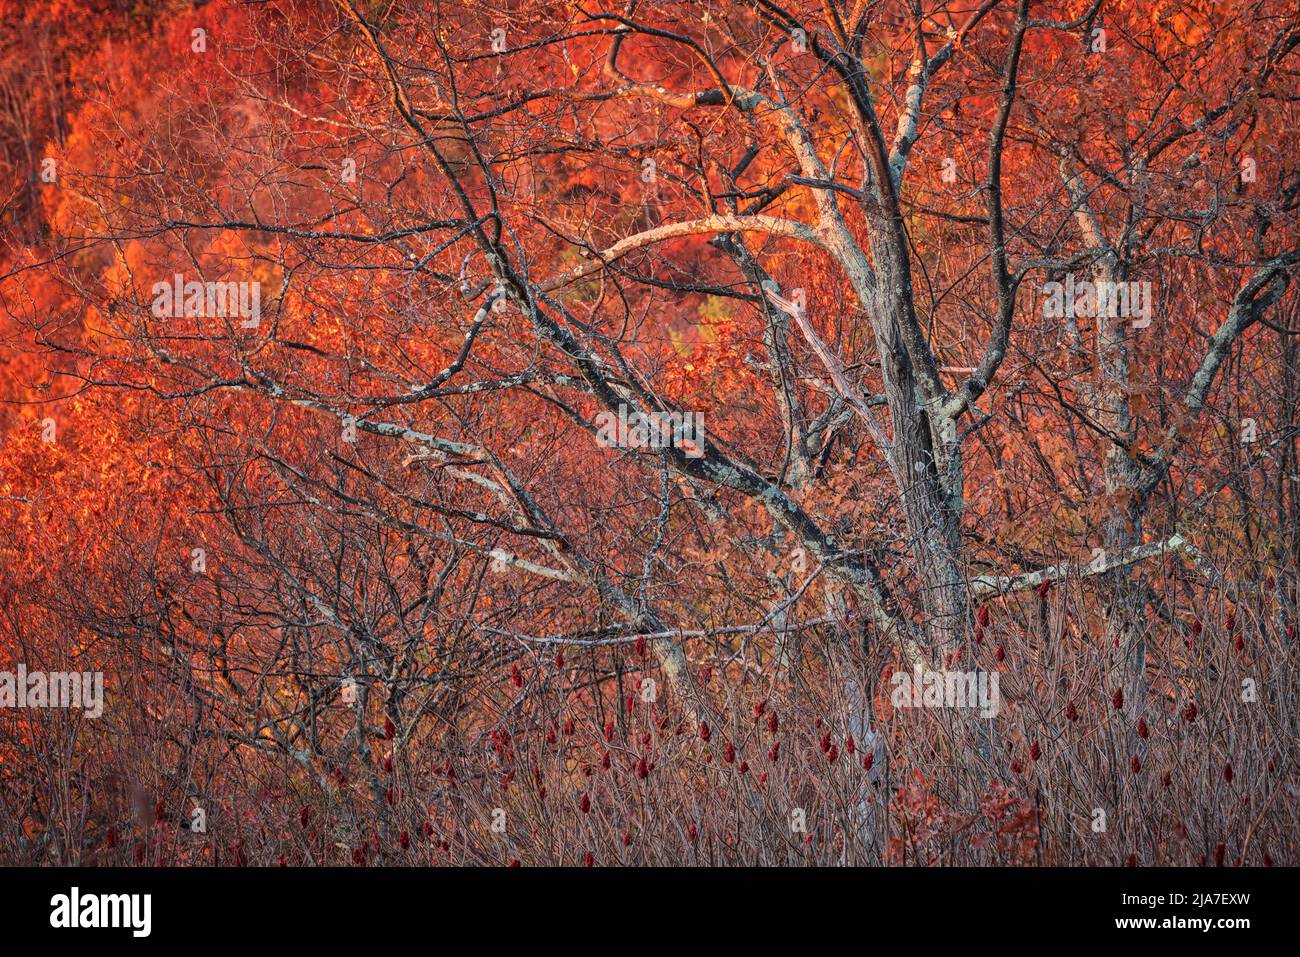 Autumn color at Jewell Hollow Overlook in Shenandoah National Park Stock Photo